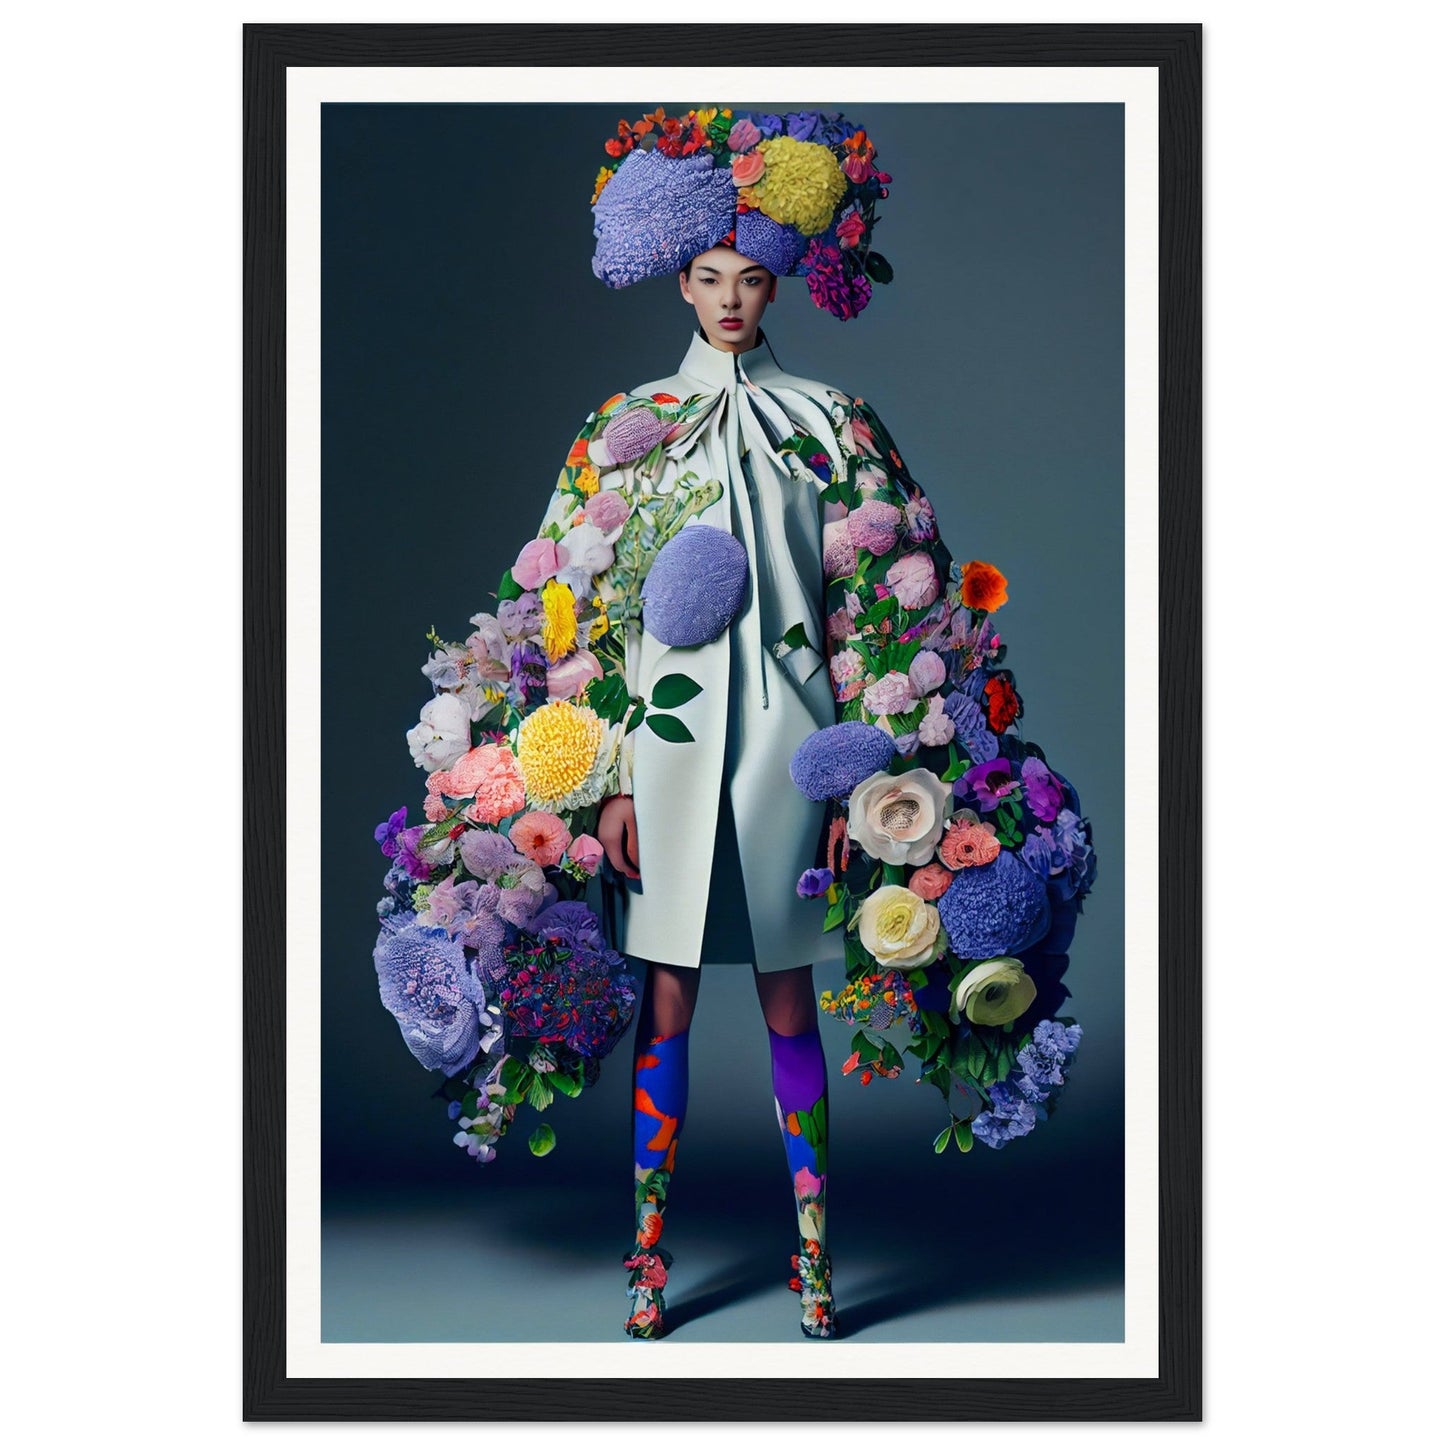 A framed print of Flowers Up Your Sleeves The Oracle Windows™ Collection is the perfect poster for my wall.